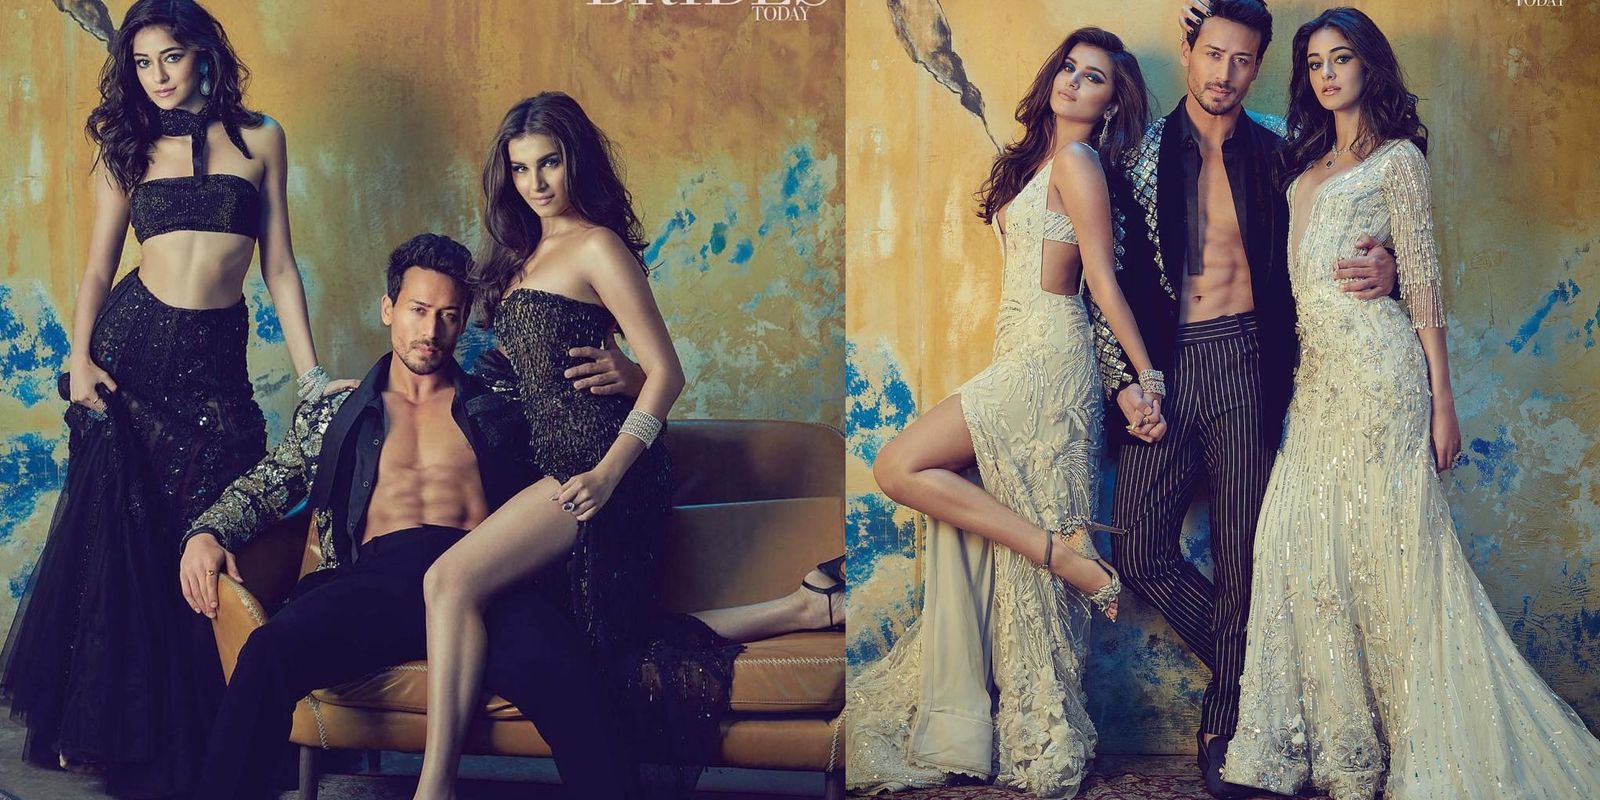 Students 2.0- Tiger Shroff, Ananya Panday And Tara Sutaria- Sizzle On The Cover Of A Magazine!